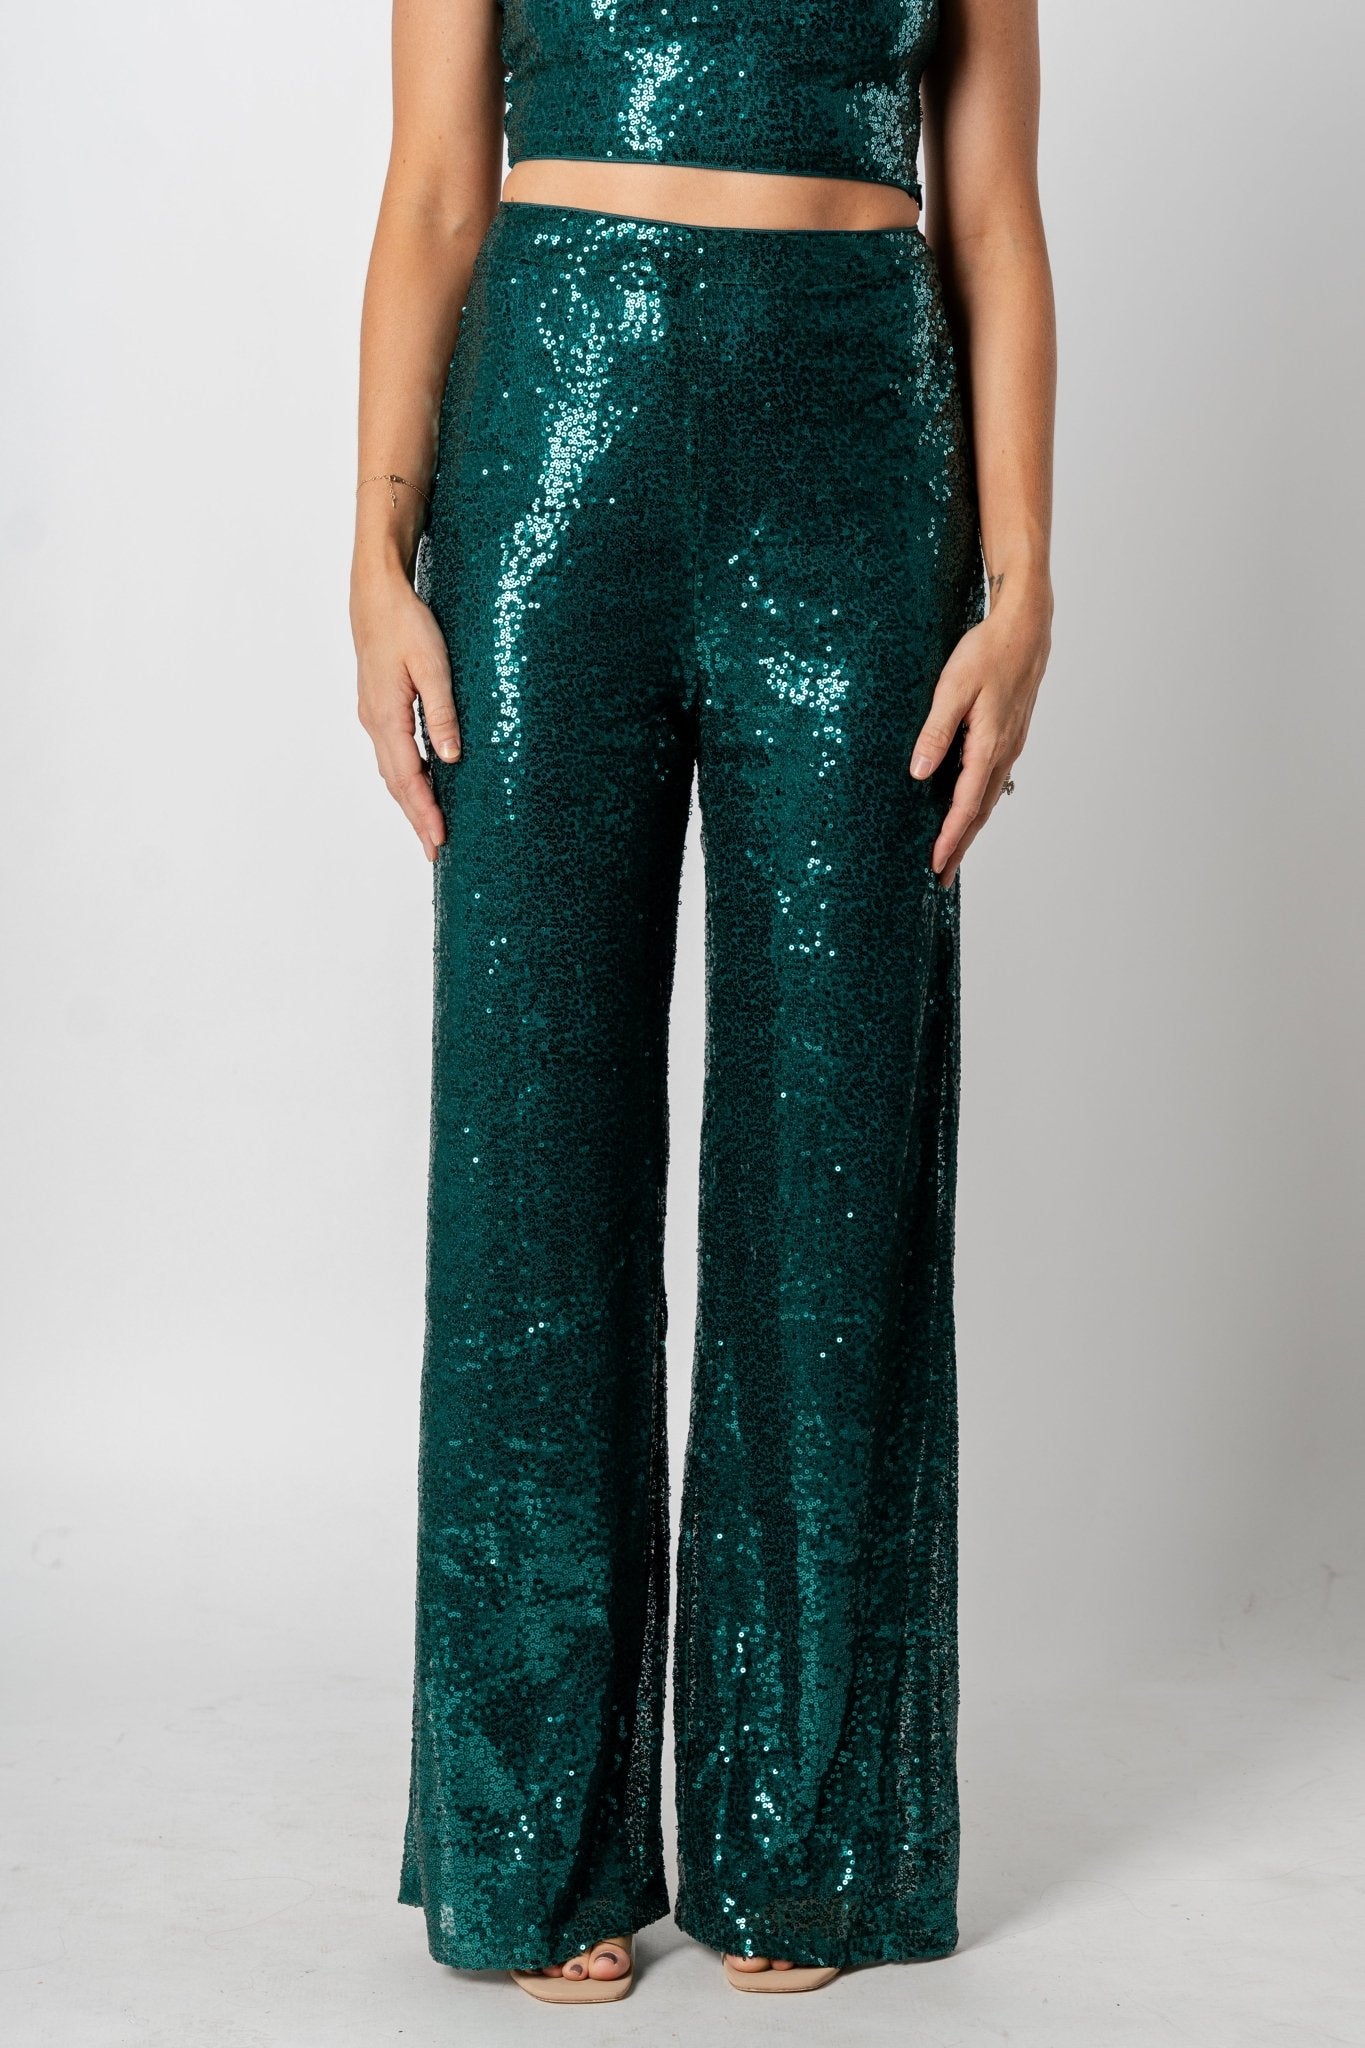 Teal Sequin Pants Turquoise Leggings Turquoise Sequin Leggings Aqua Sequin  Pants 